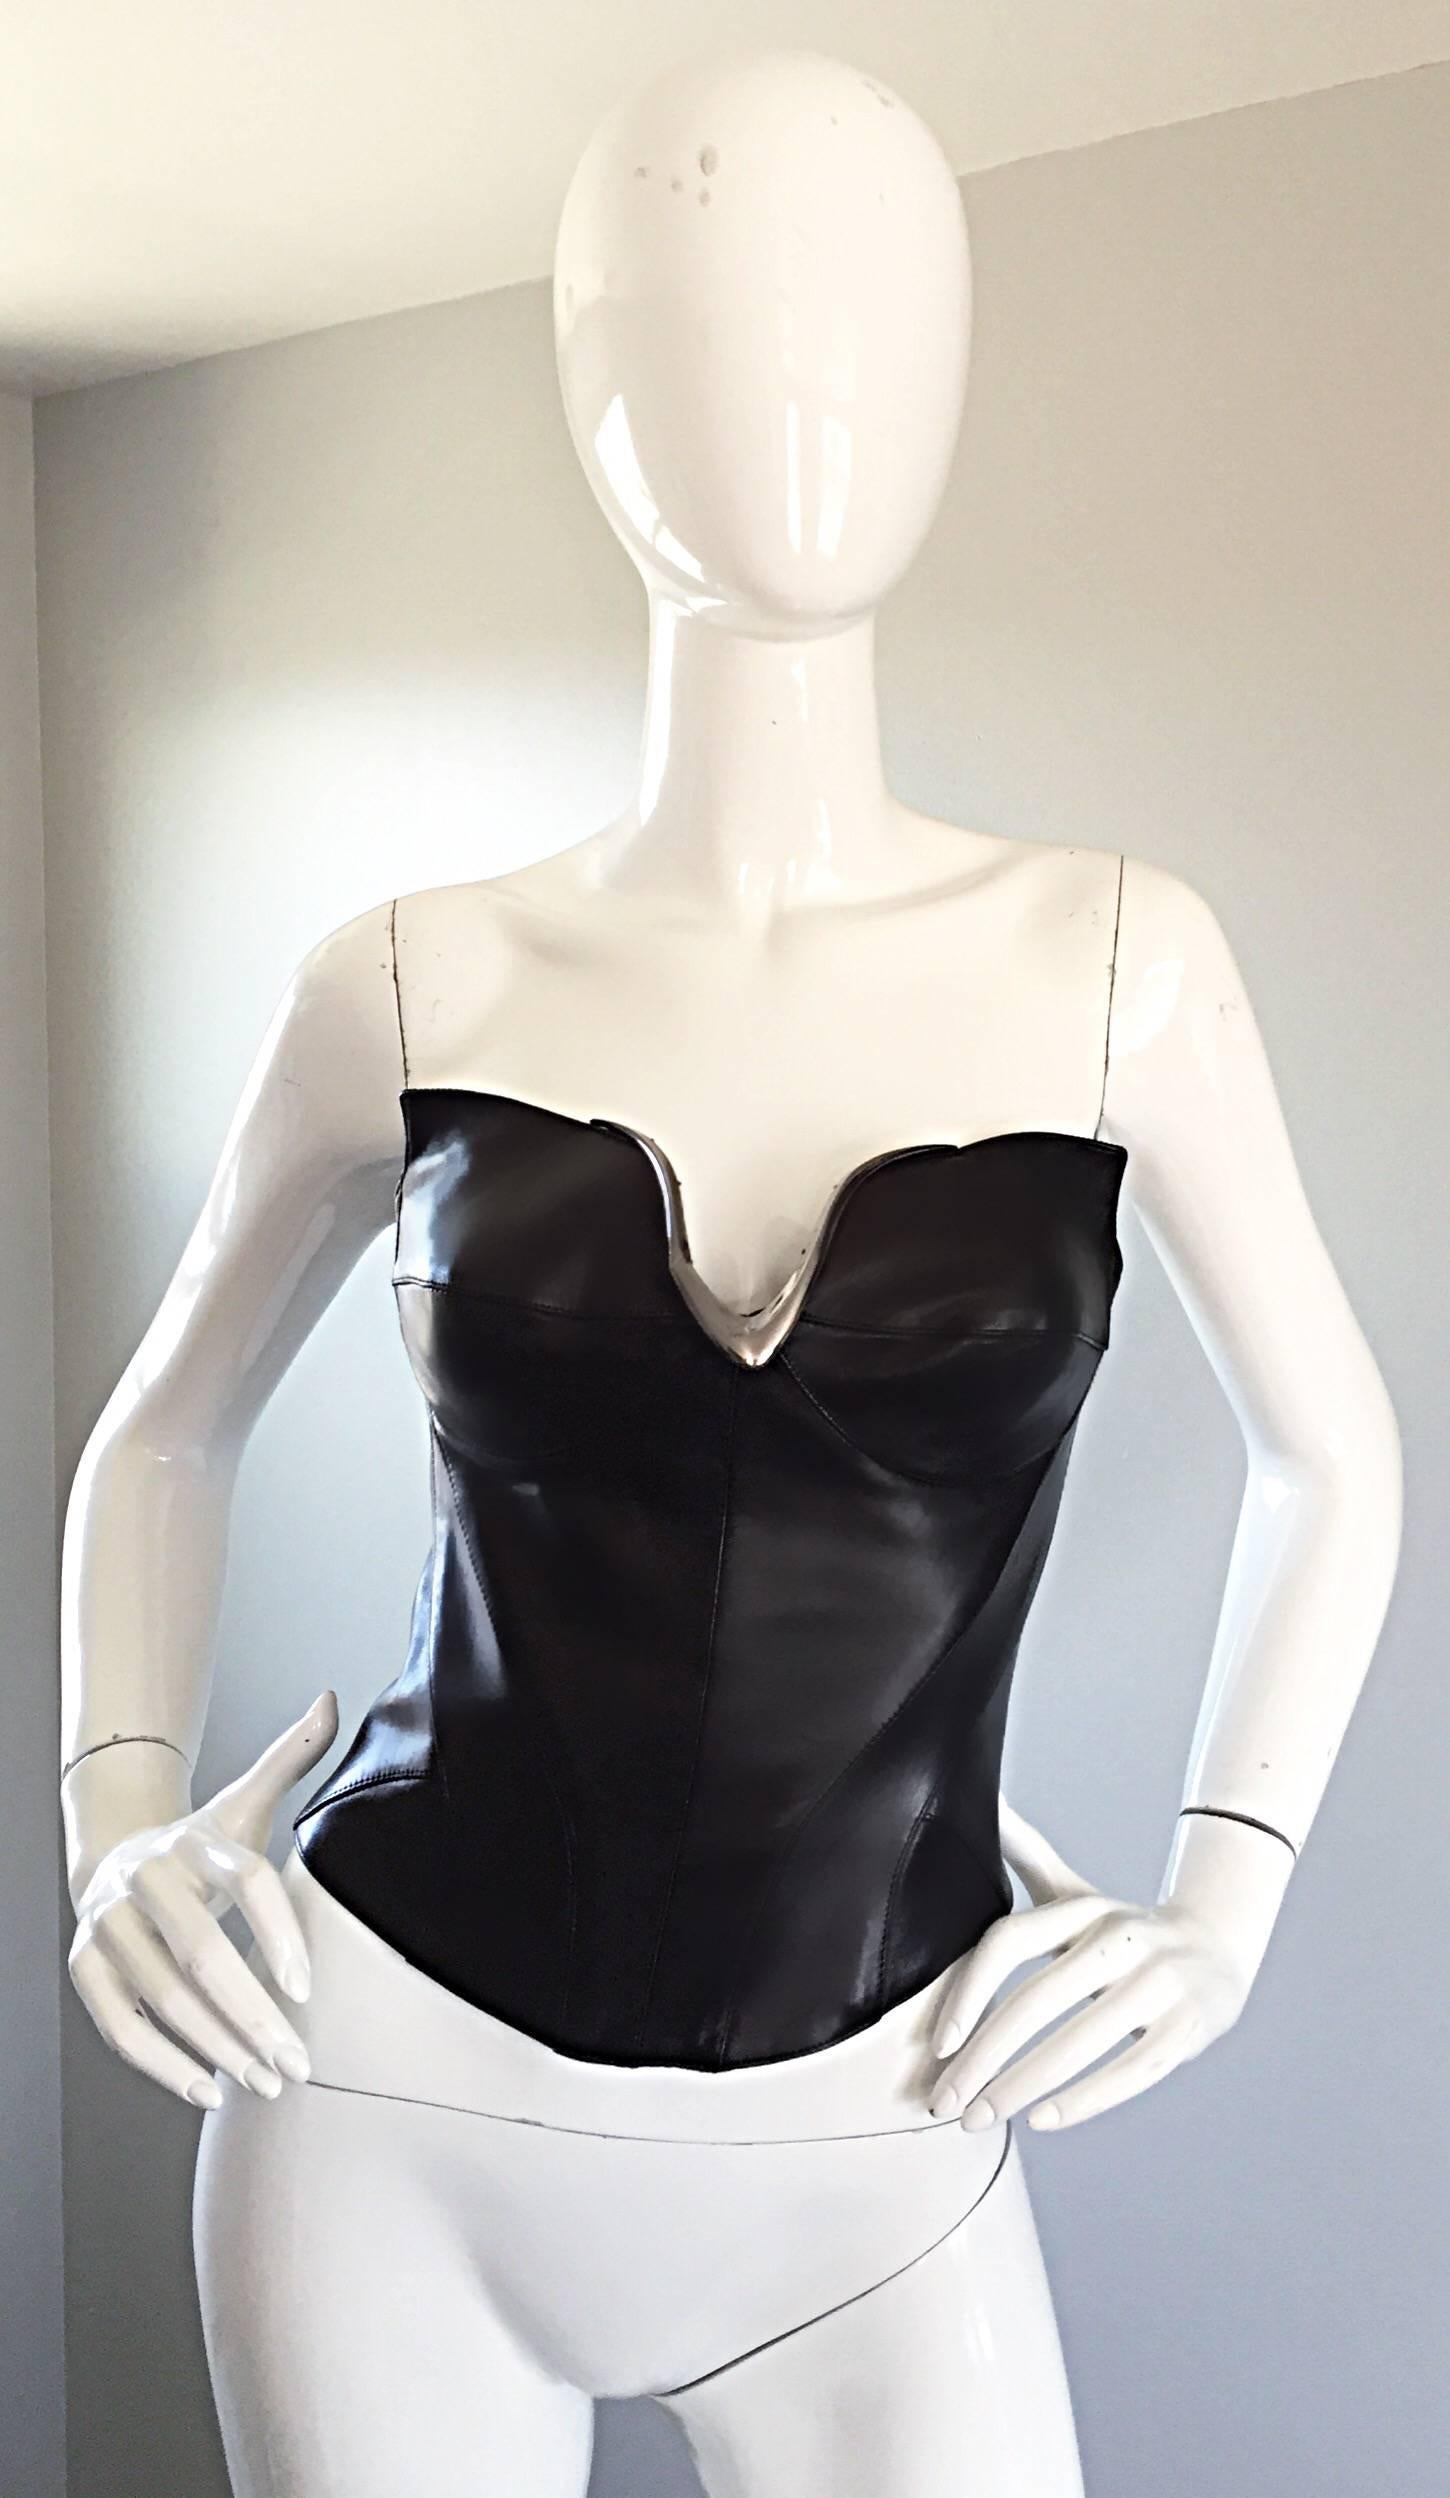 Sexy, rare and iconic vintage THIERRY MUGLER COUTURE black leather Avant Garde bustier corset top! Signature Mugler 'Catwoman' flaps at each side of the bust. Silver metal V at center bust reveals just the right amount of skin. Signature flattering